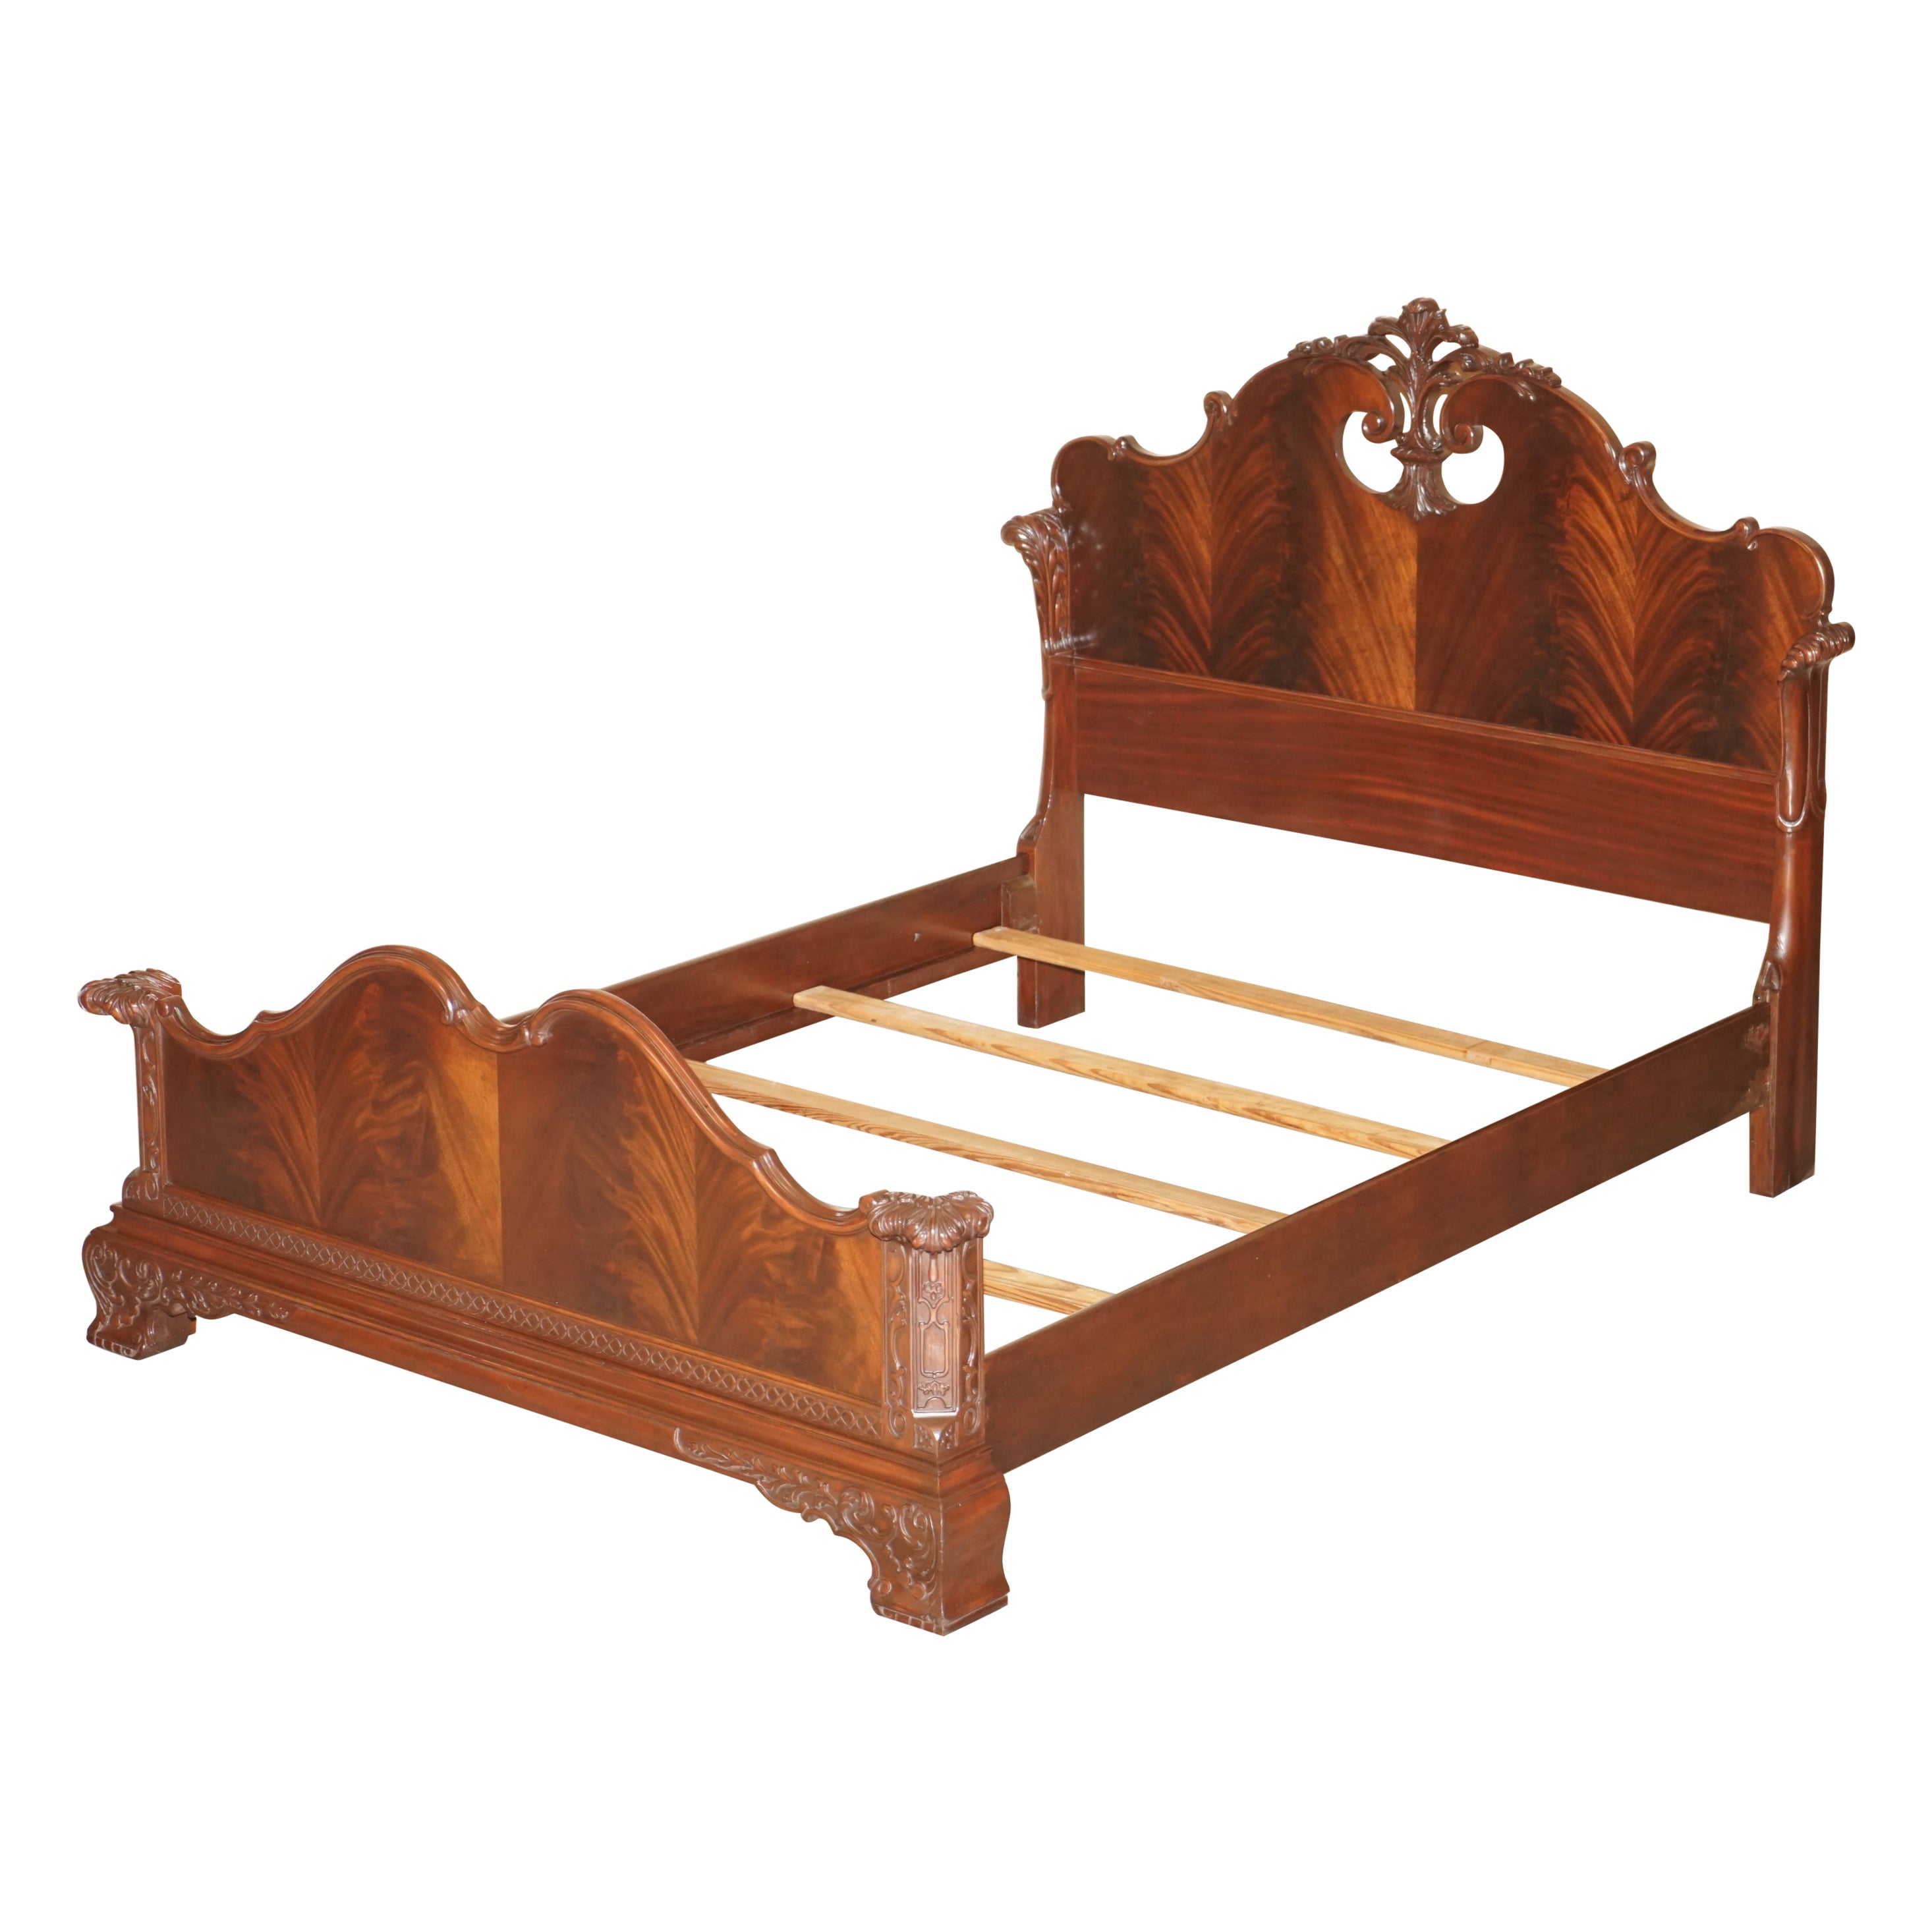 EXQUISITELY CARVED ANTIQUE ViCTORIAN CIRCA 1880 FLAMED HARDWOOD DOUBLE BED FRAME For Sale